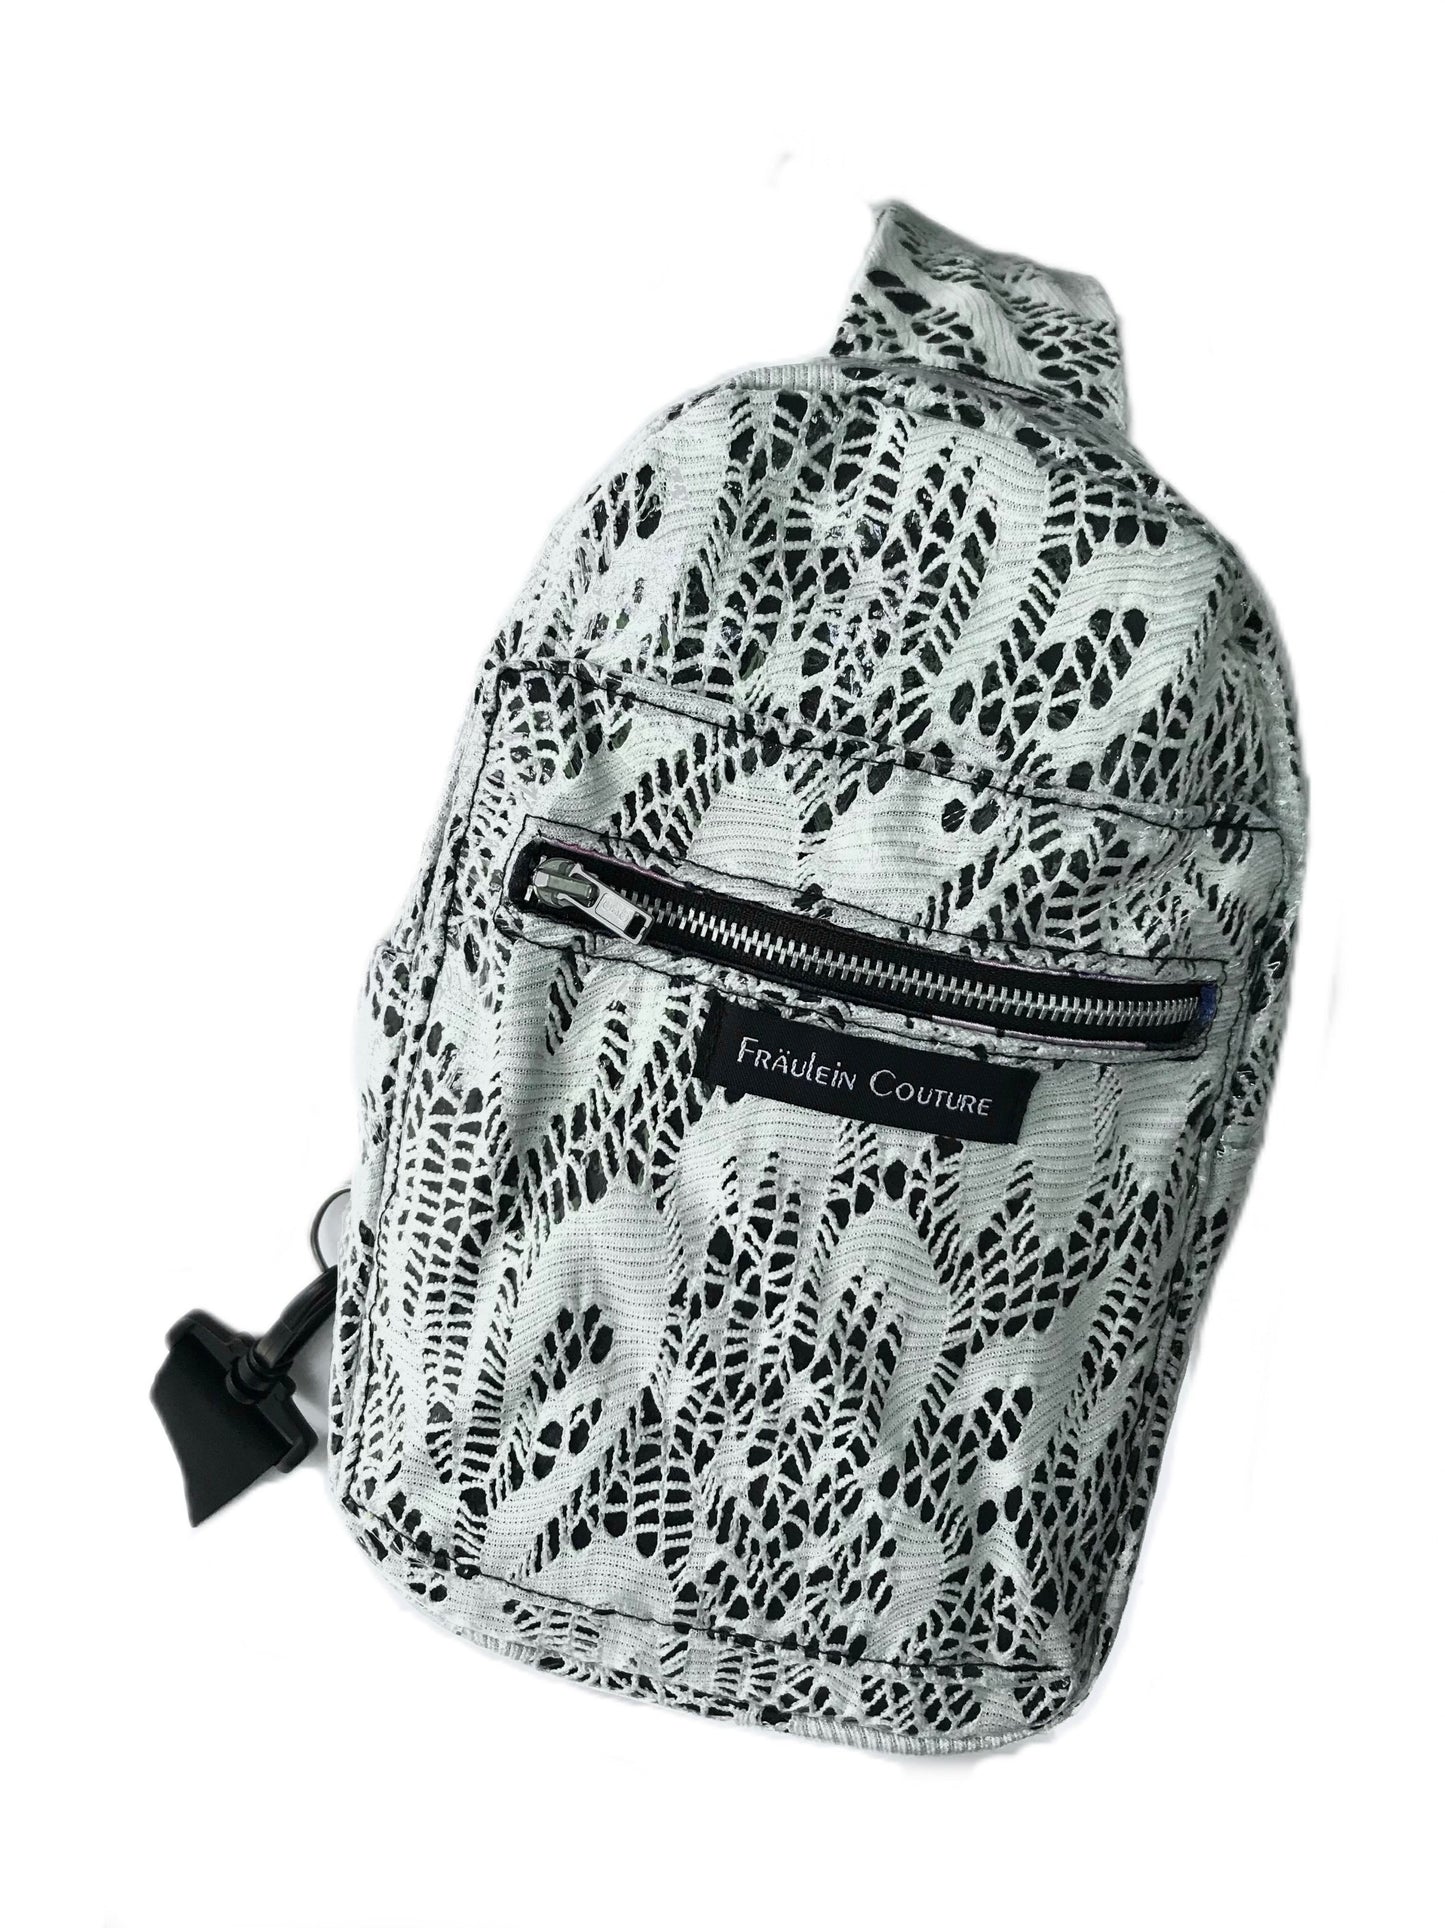 Mini Backpack Sling with Phone Pocket in Laminated Lace - Waterproof